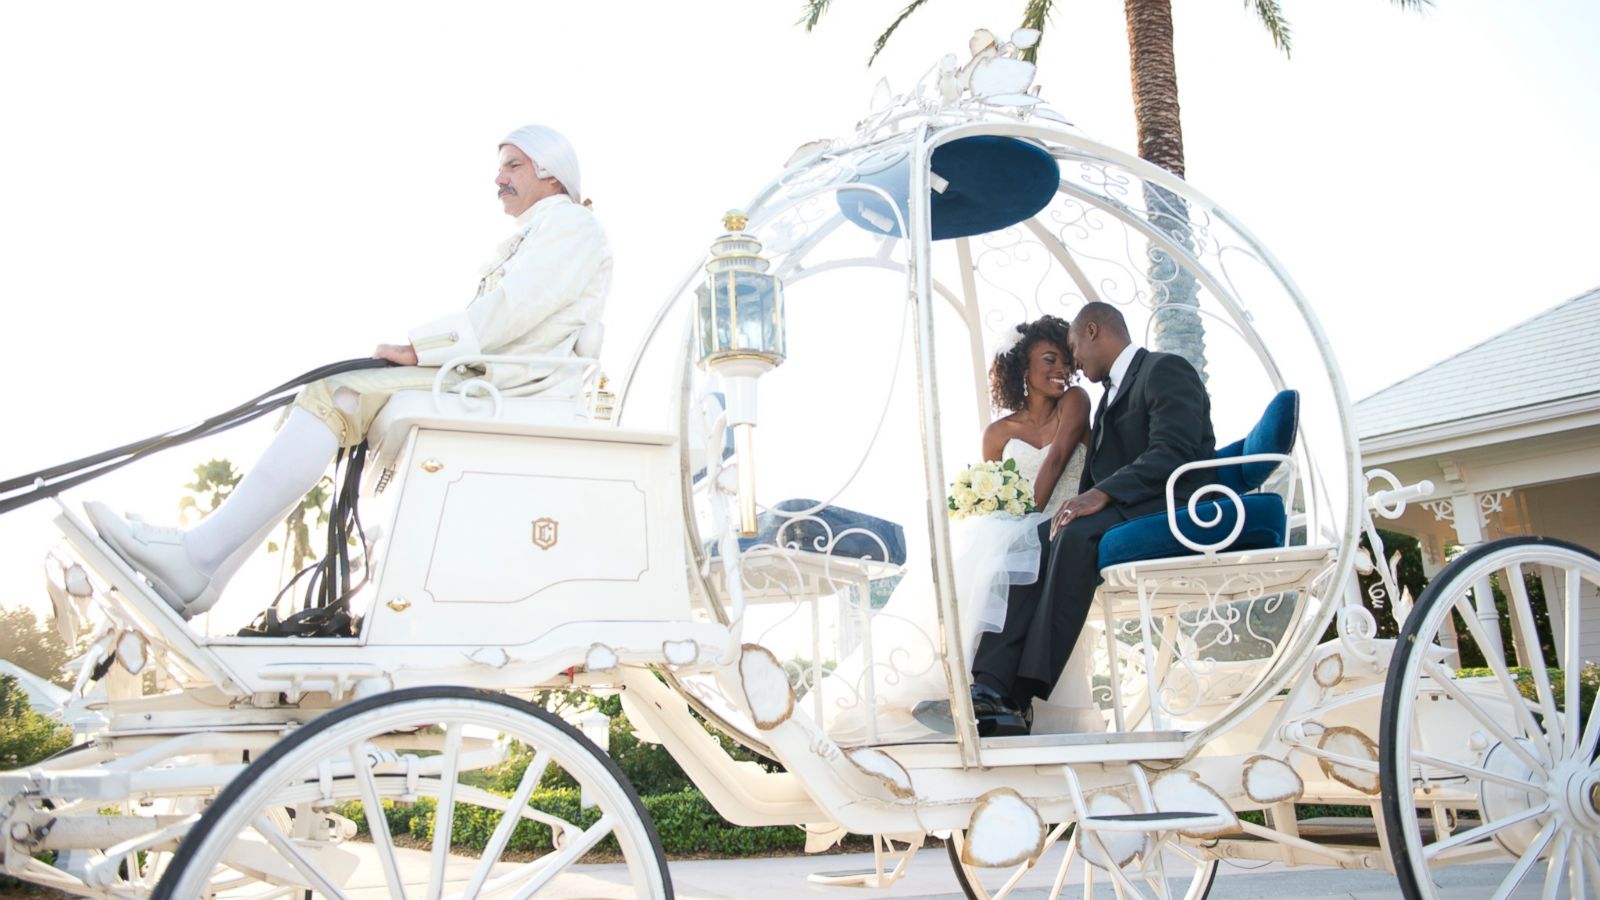 PHOTO: "GMA" and Disney's Fairy Tale Weddings & Honeymoons want to help give you and your fiance the chance to have the magic wedding of your dreams in Disney World!